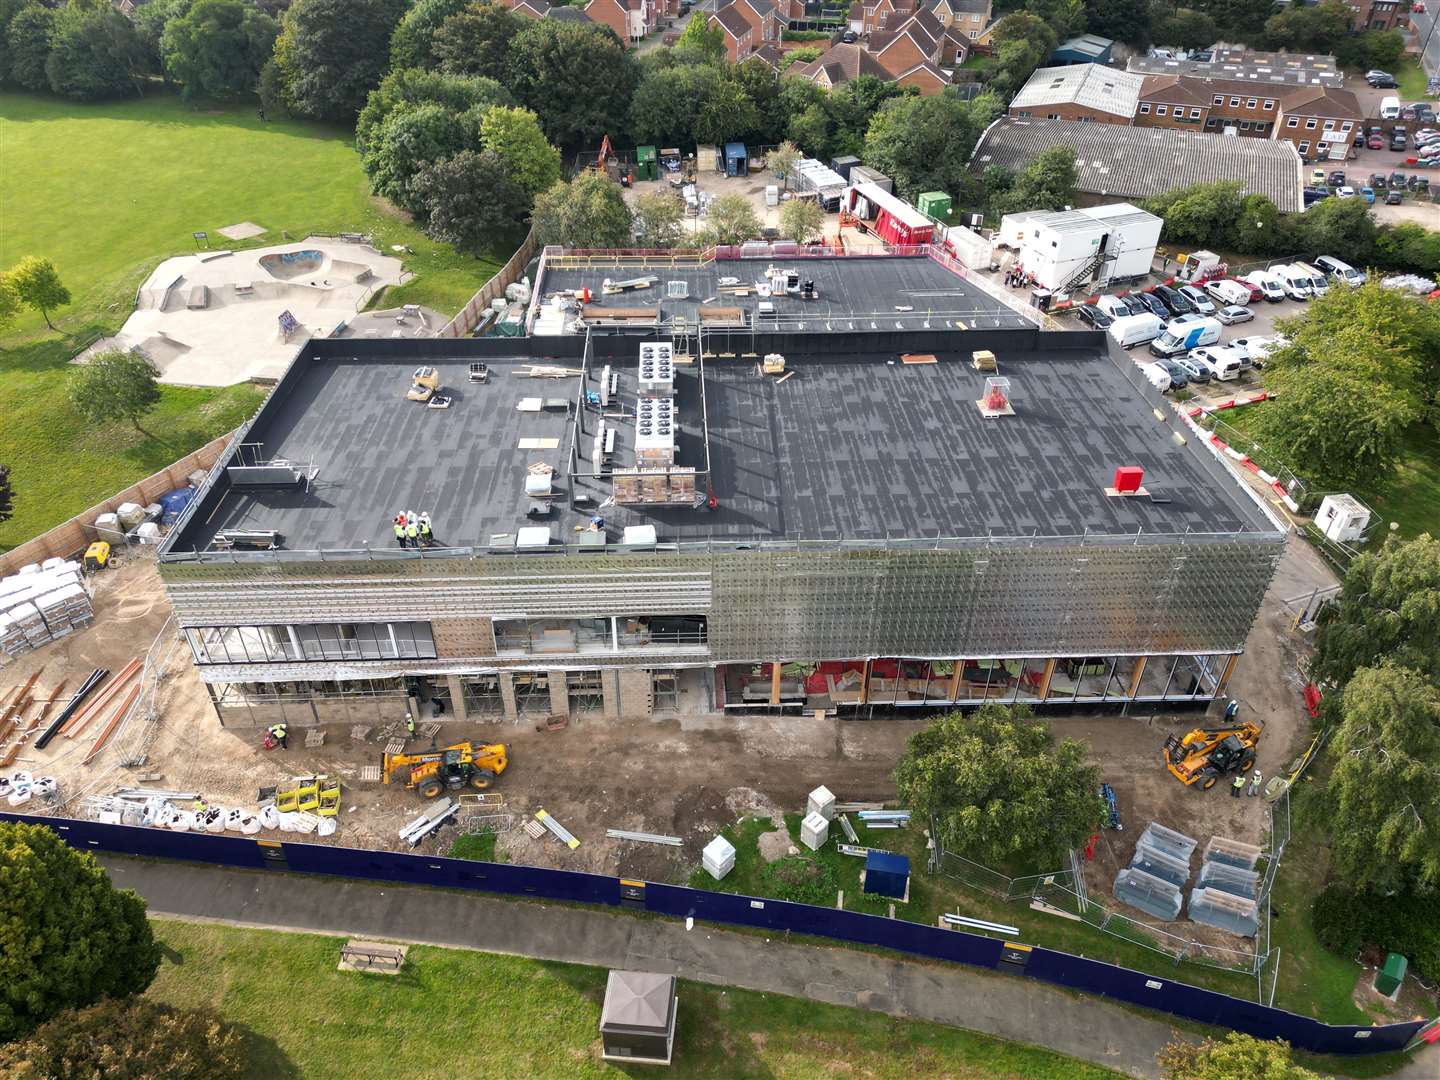 The roof is now on at Splashes leisure centre in Rainham. Picture: Phil Drew